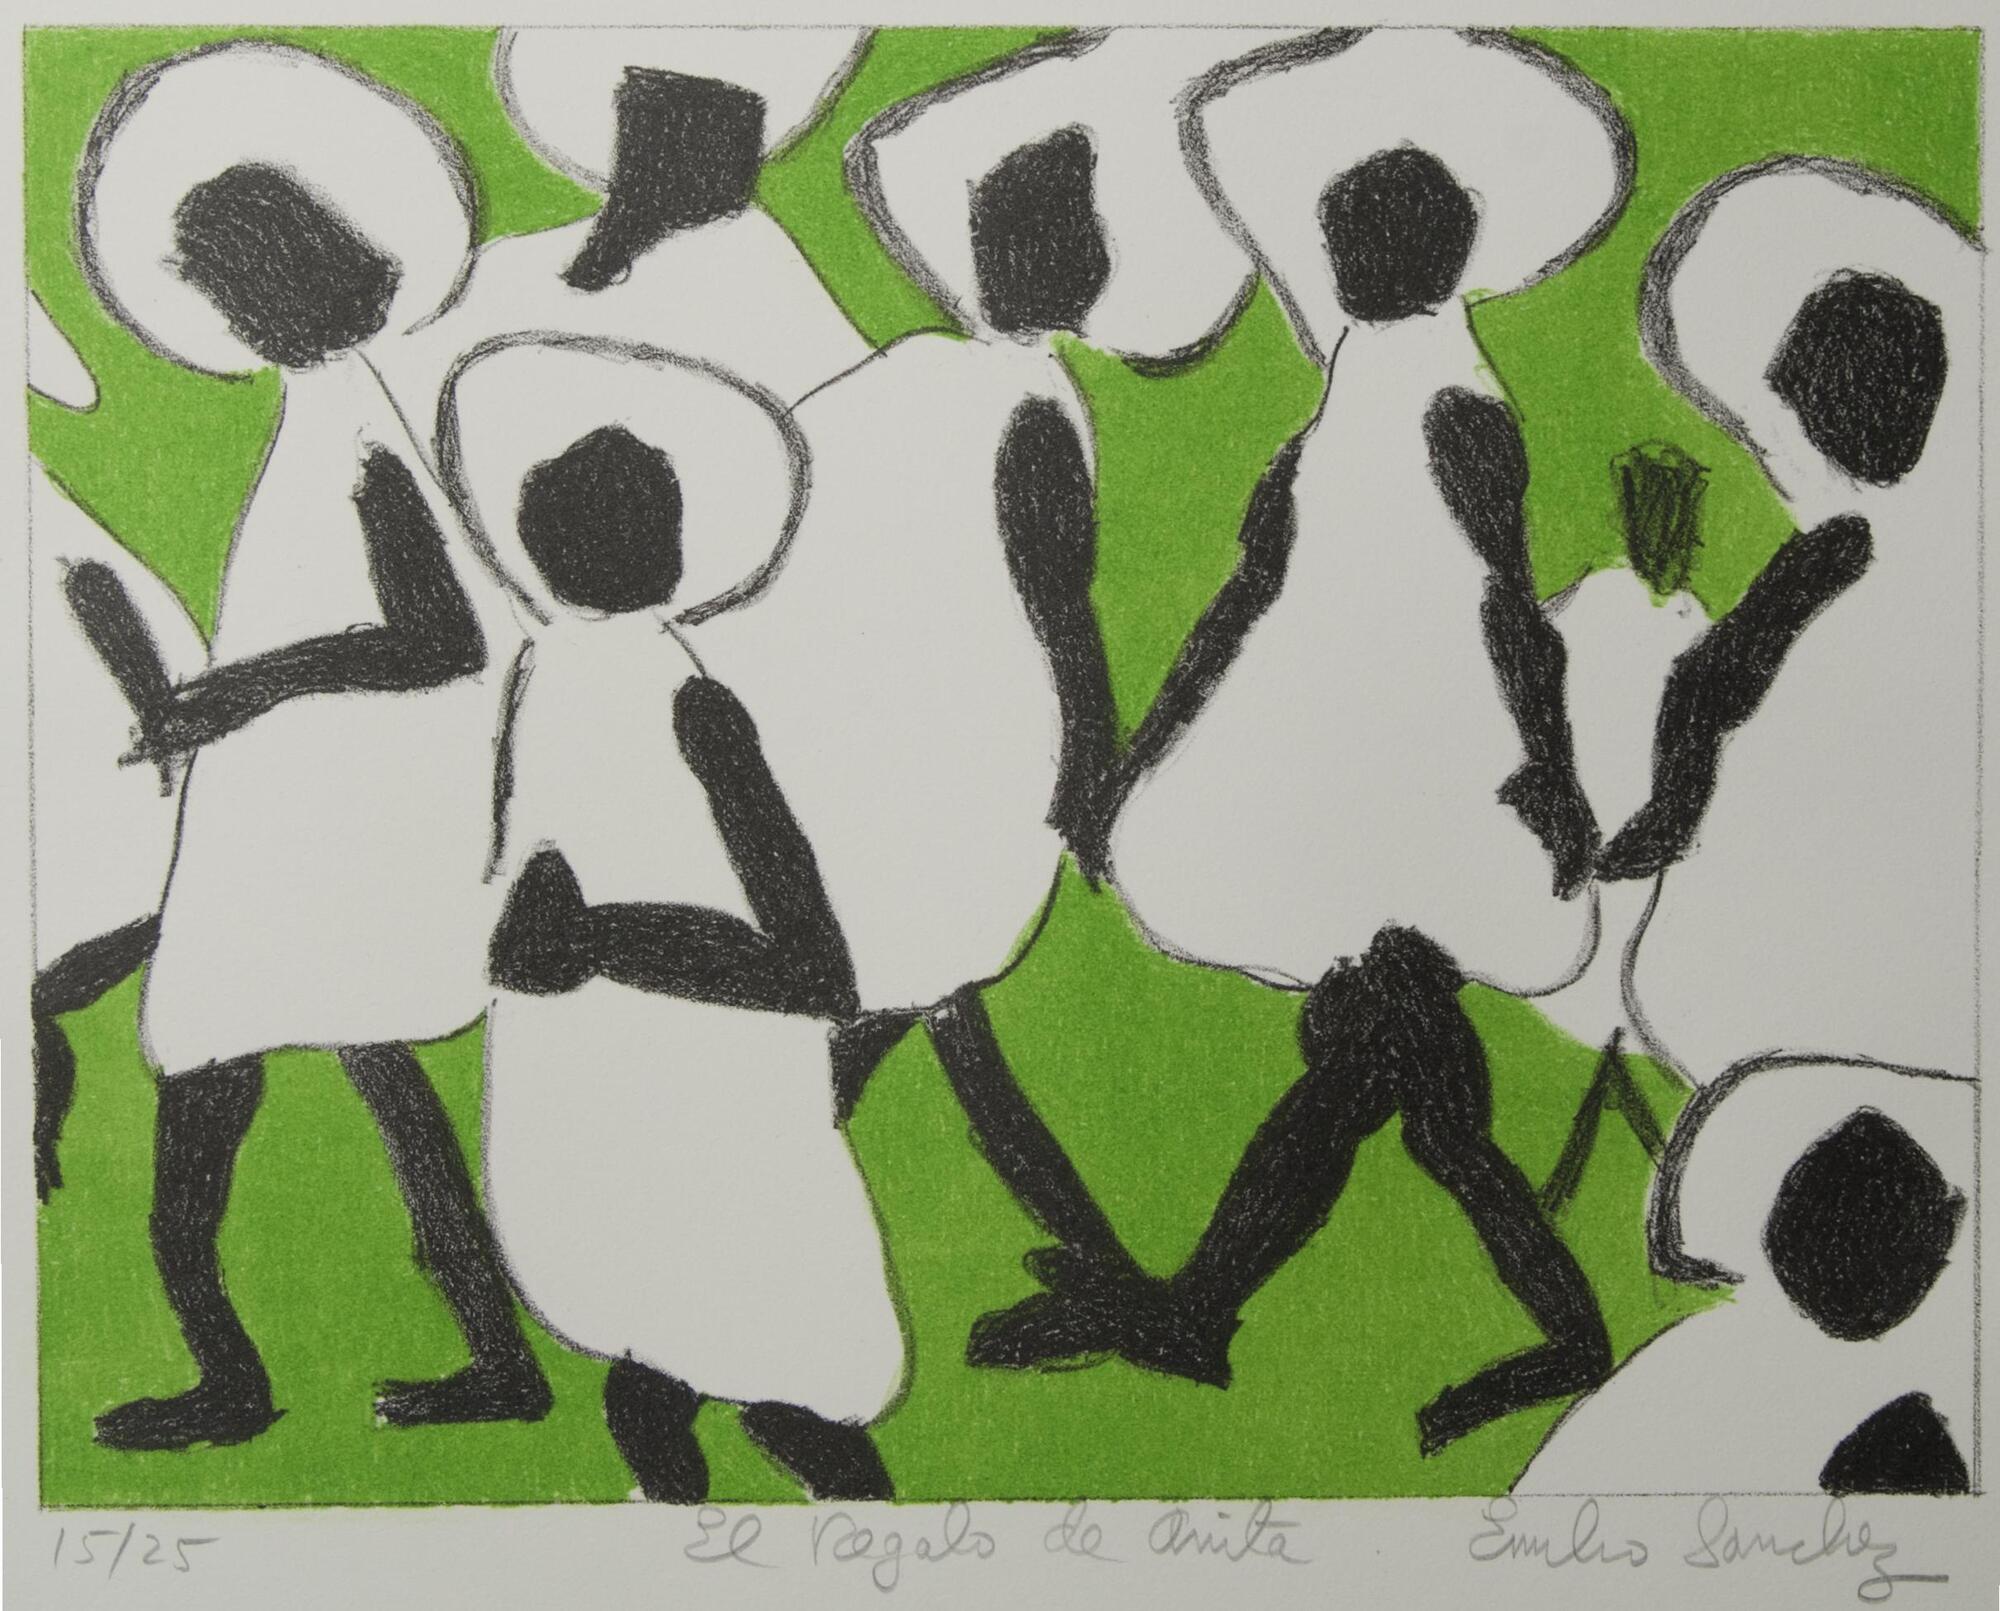 A color print of a group of children walking.